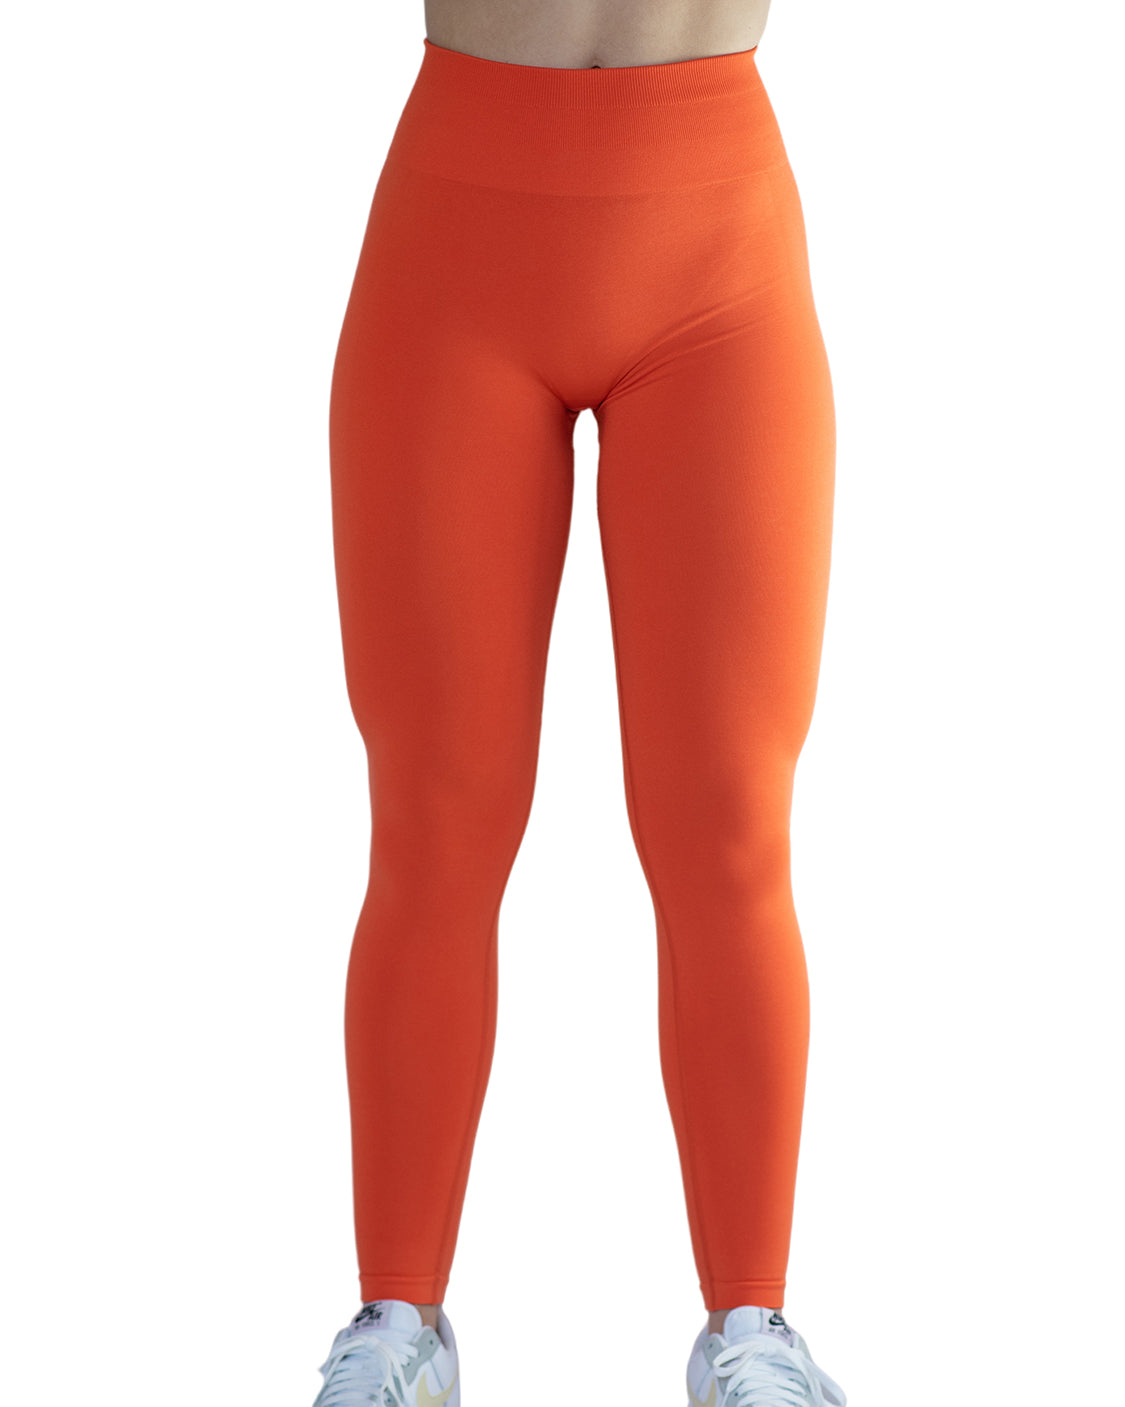 Spanx Workout Leggings Review 2023: Tested by Style Editors